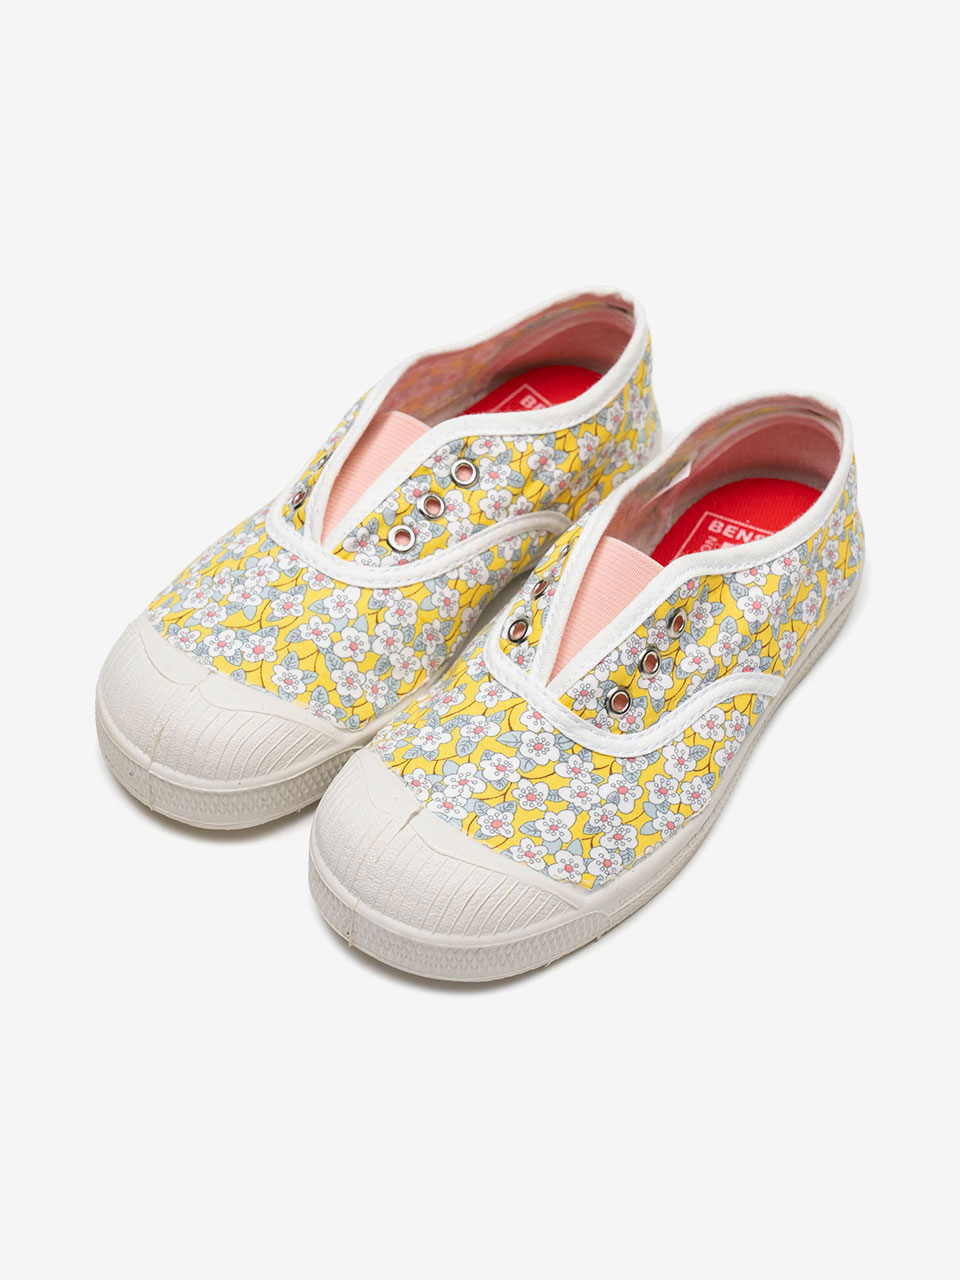 KID LIMITED ELLY LIBERTY - YELLOW FLOWER